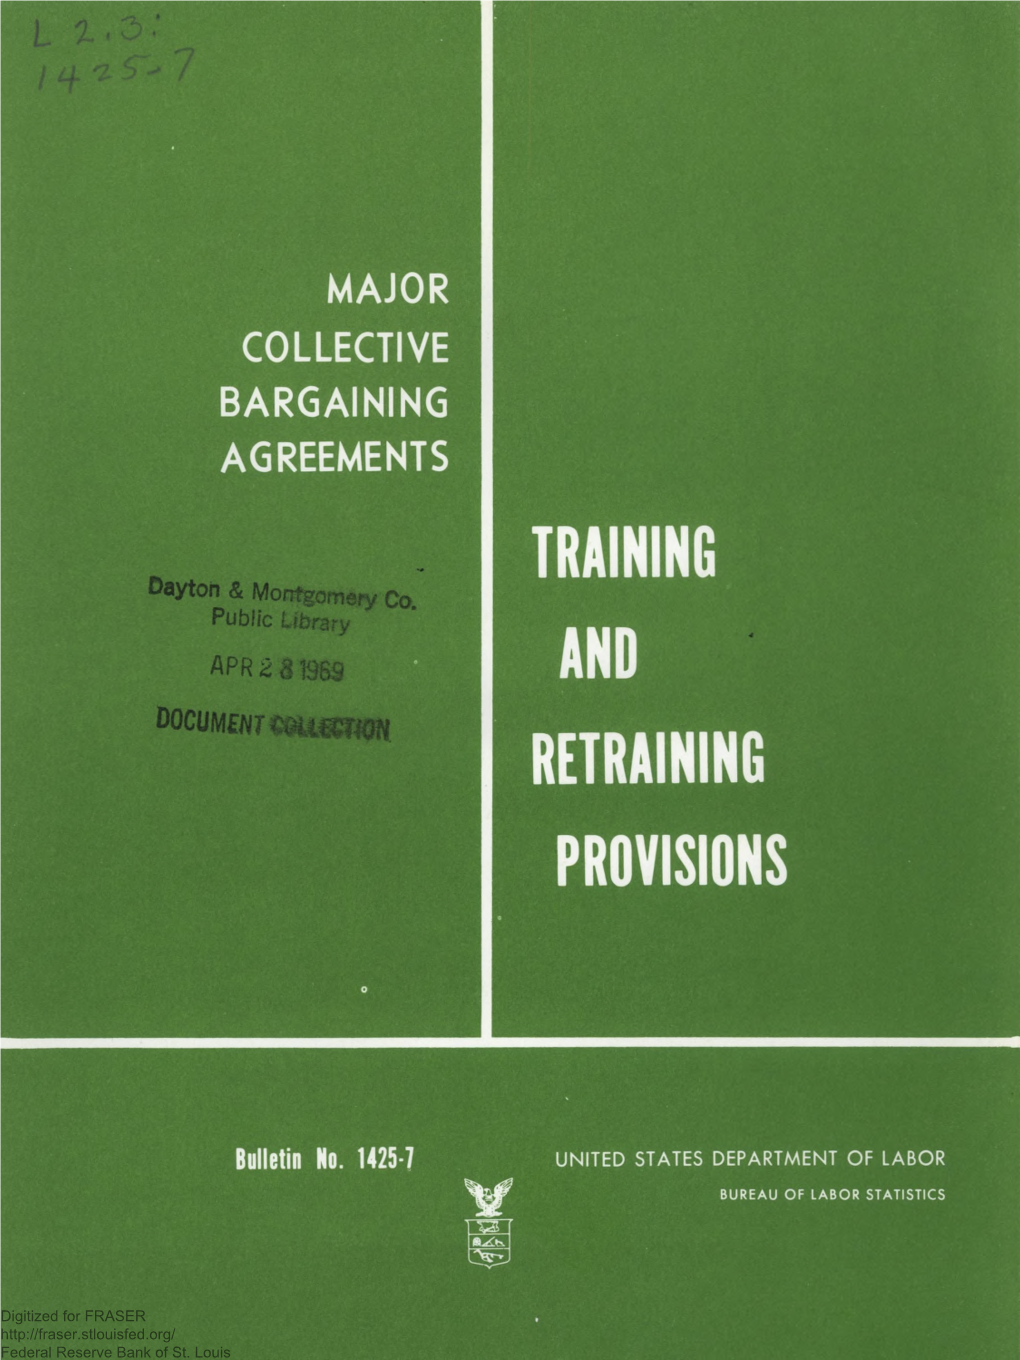 Major Collective Bargaining Agreements in the United States